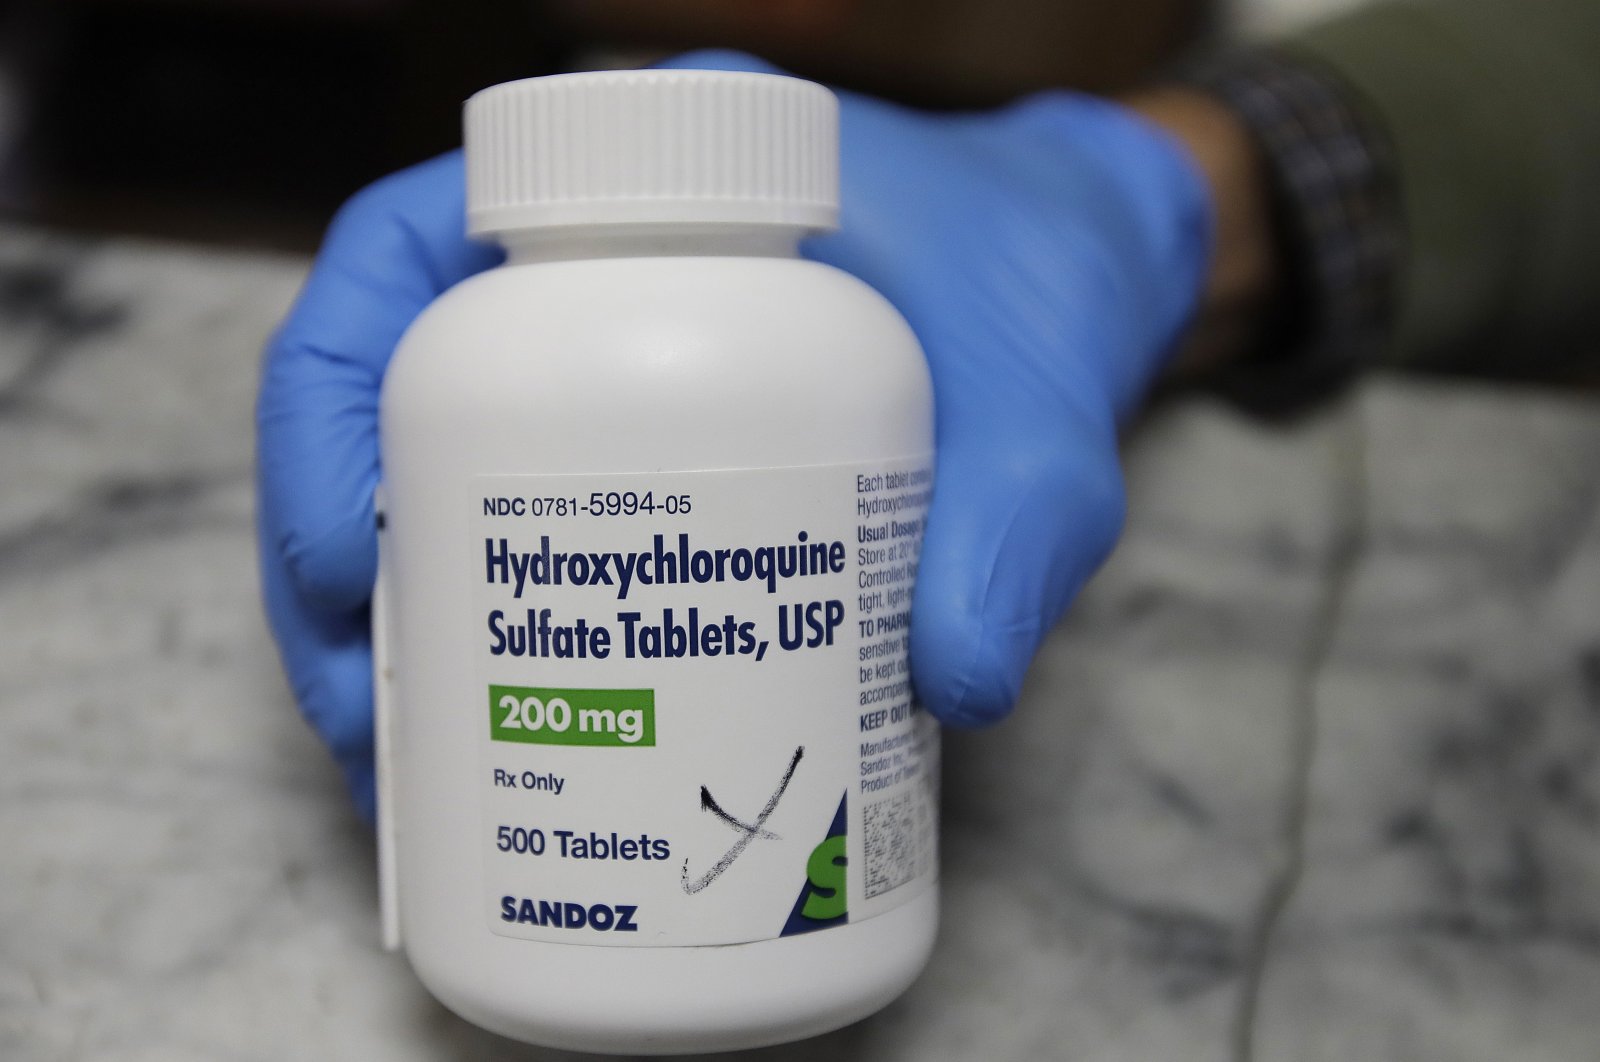 A pharmacist shows a bottle of the drug hydroxychloroquine on Monday, April 6, 2020, in Oakland, California (AP Photo)